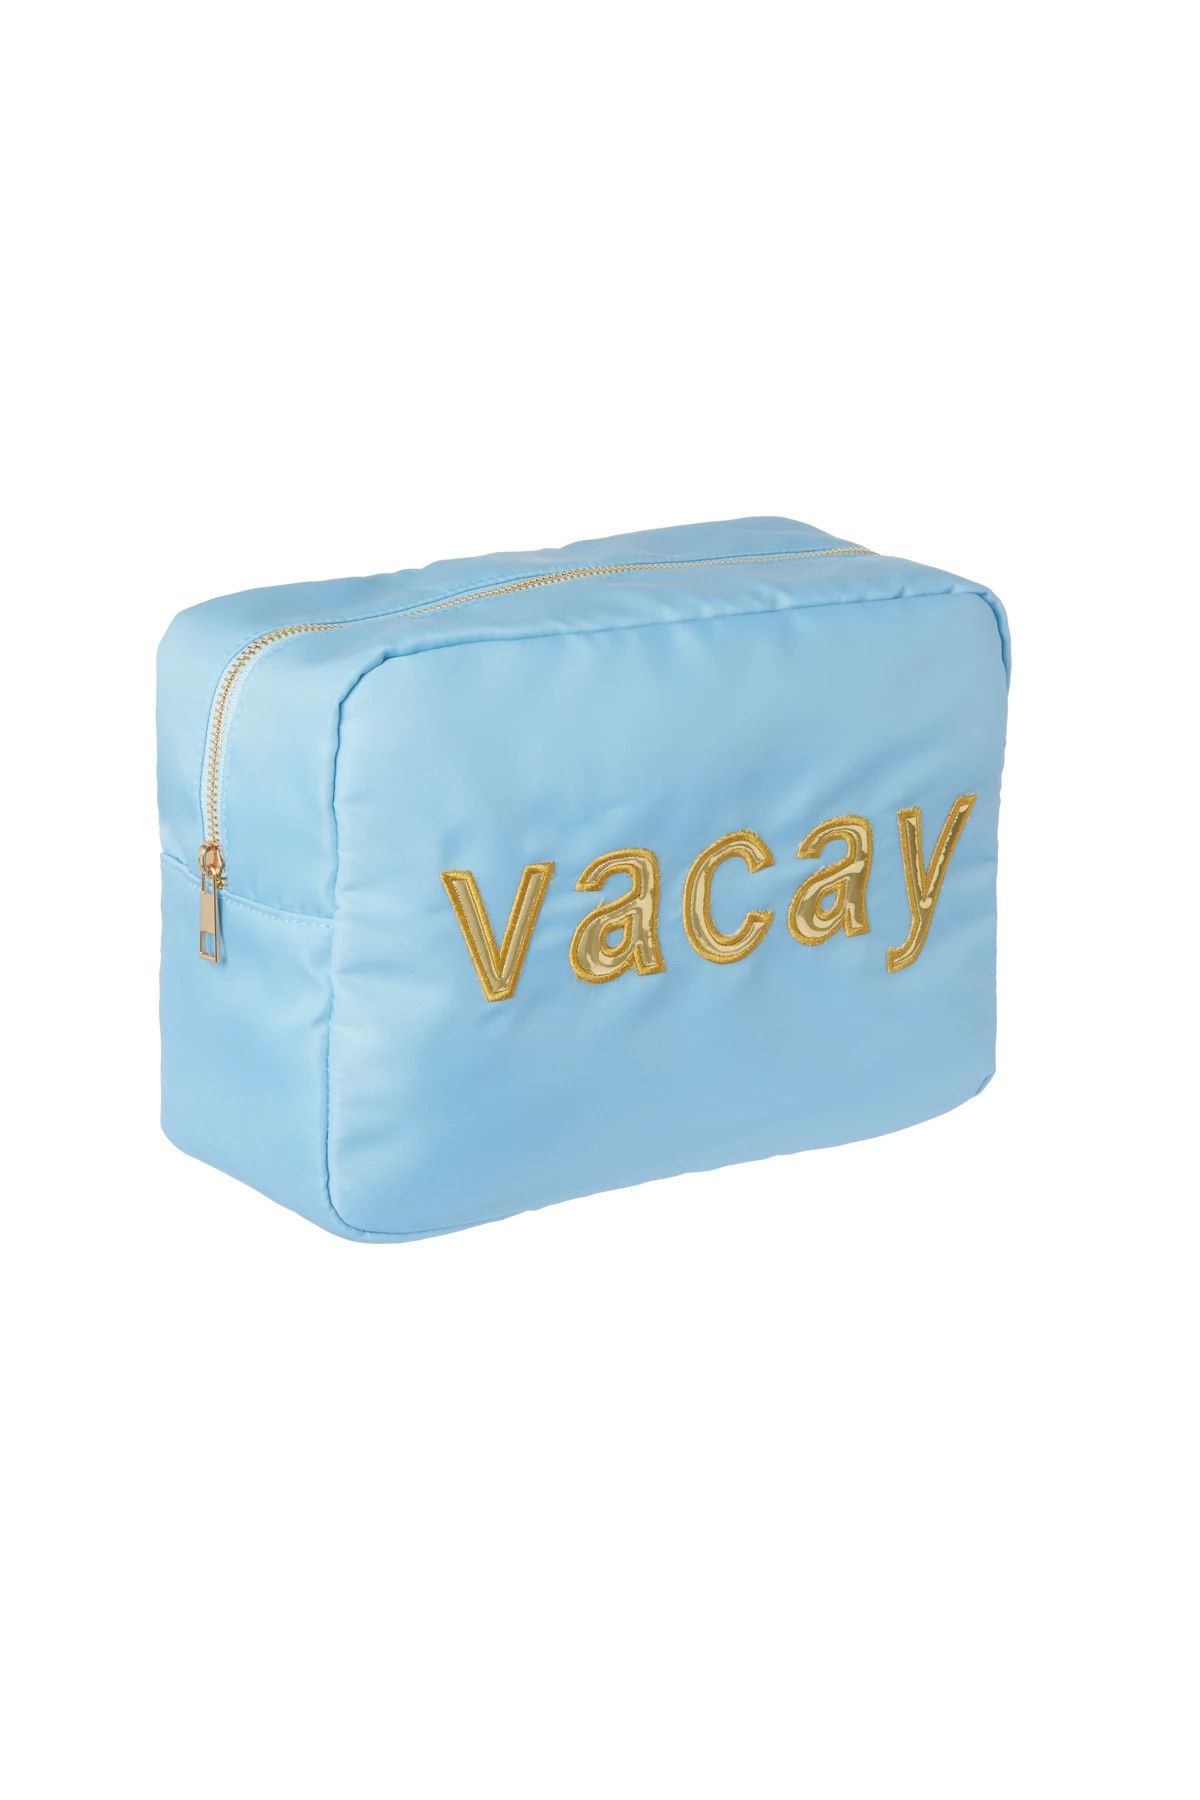 Vacay Zip Pouch | Everything But Water